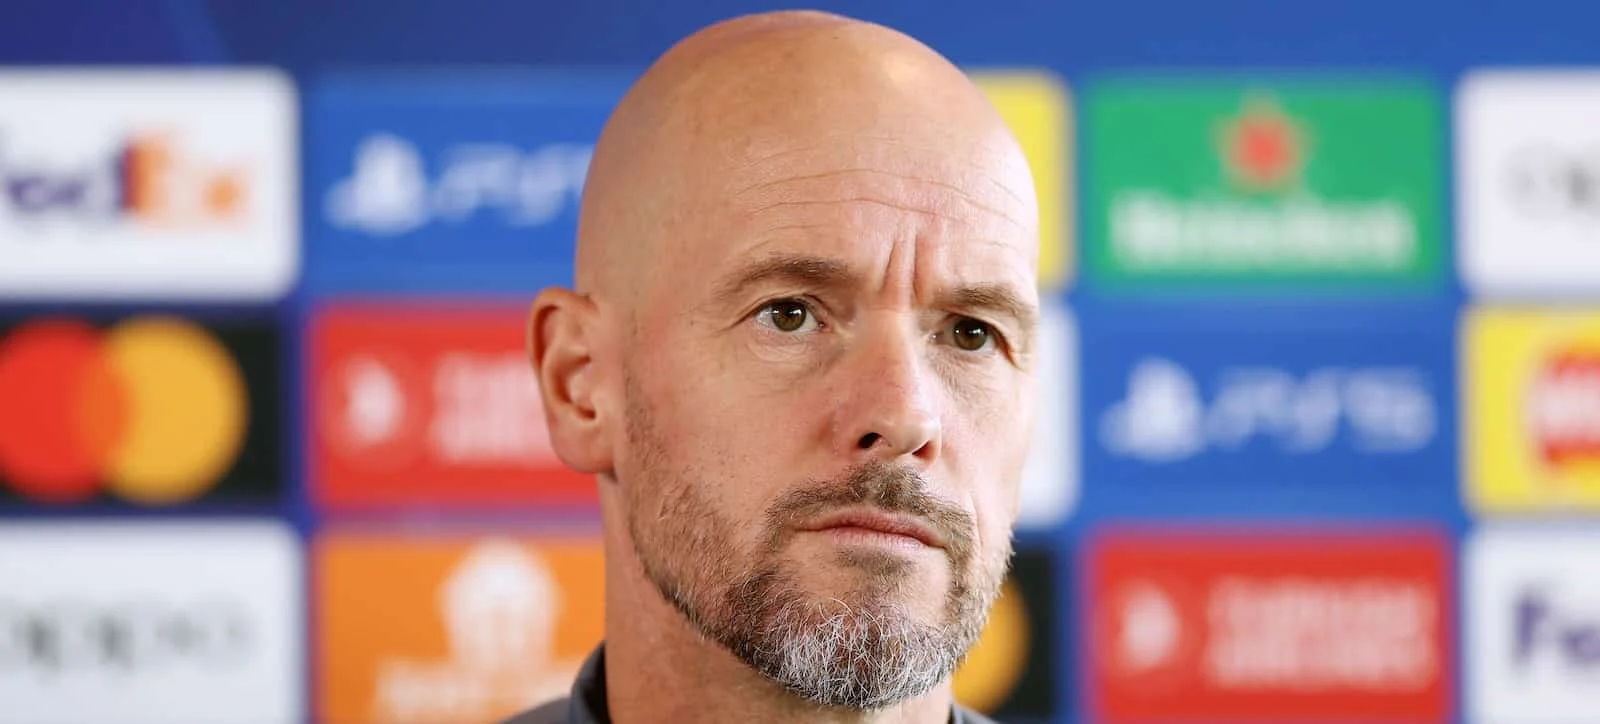 Manchester United drop the ball on Ten Hag's sack